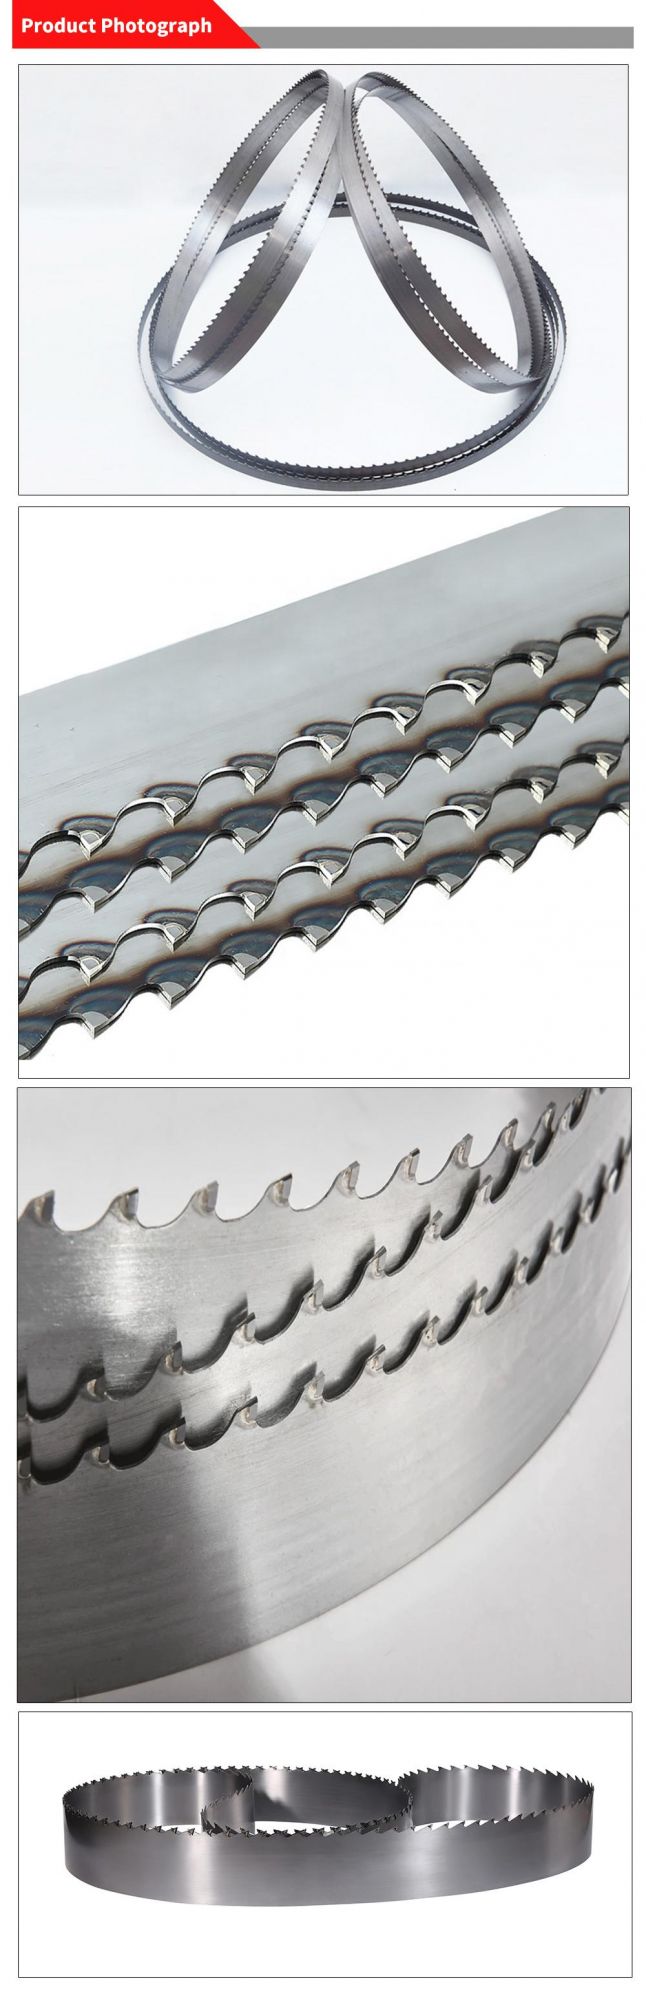 Pilihu Factory Manufacture Tct Wood Carbide Tipped Band Saw Blade Solid Blade Wood Saw Products Blades